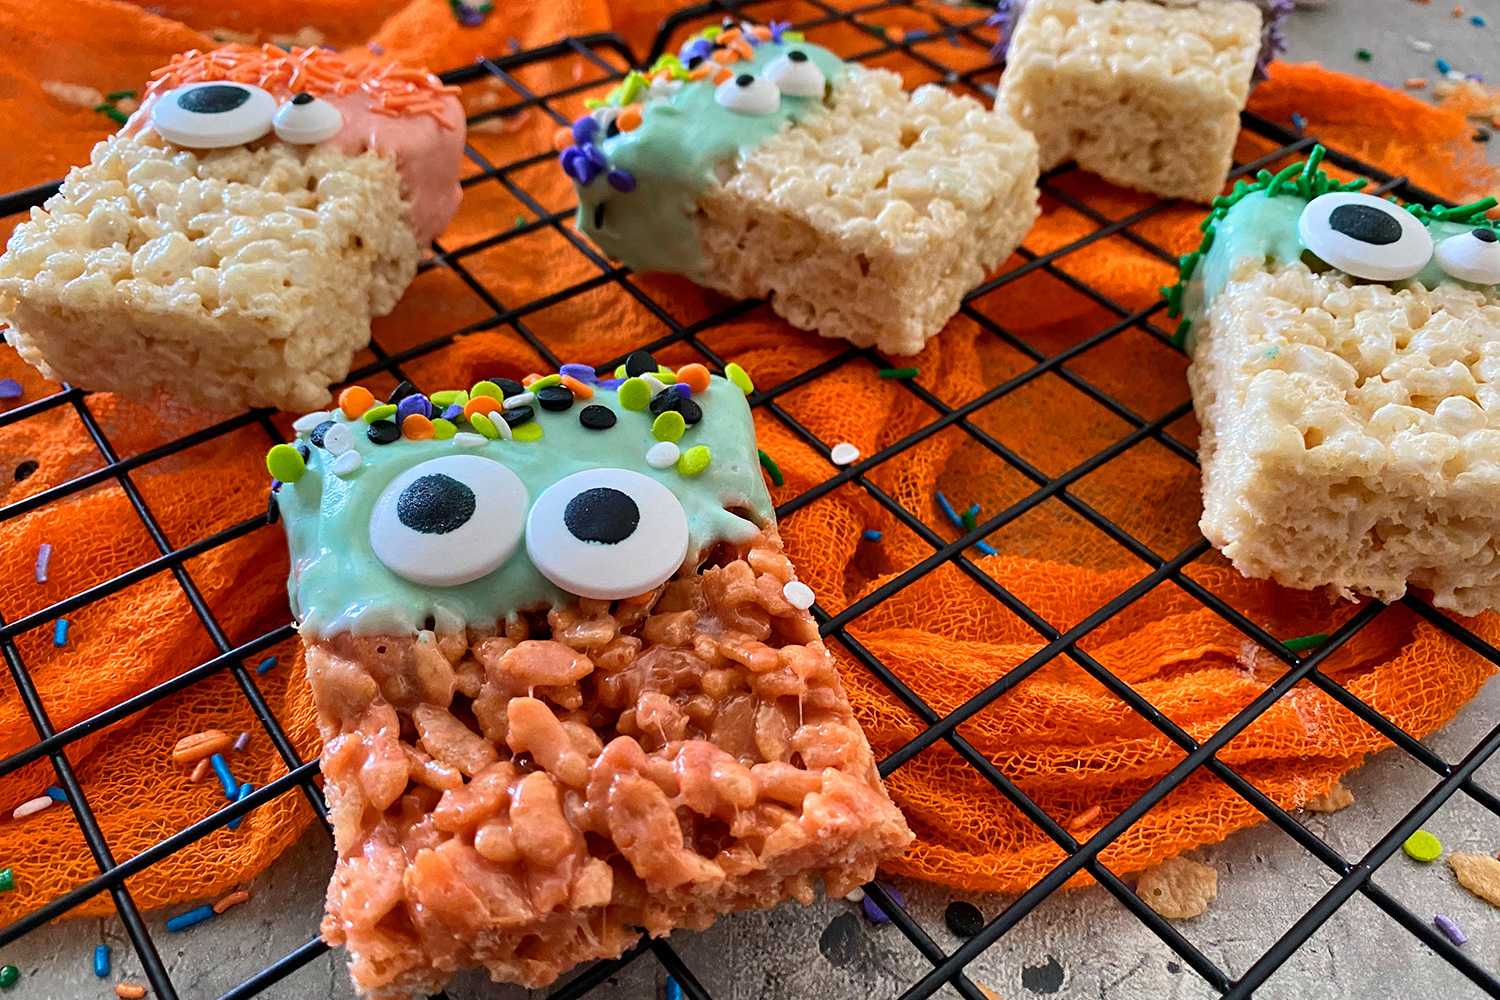 Colorful marshmallow treats with scary eyes and sprinkles